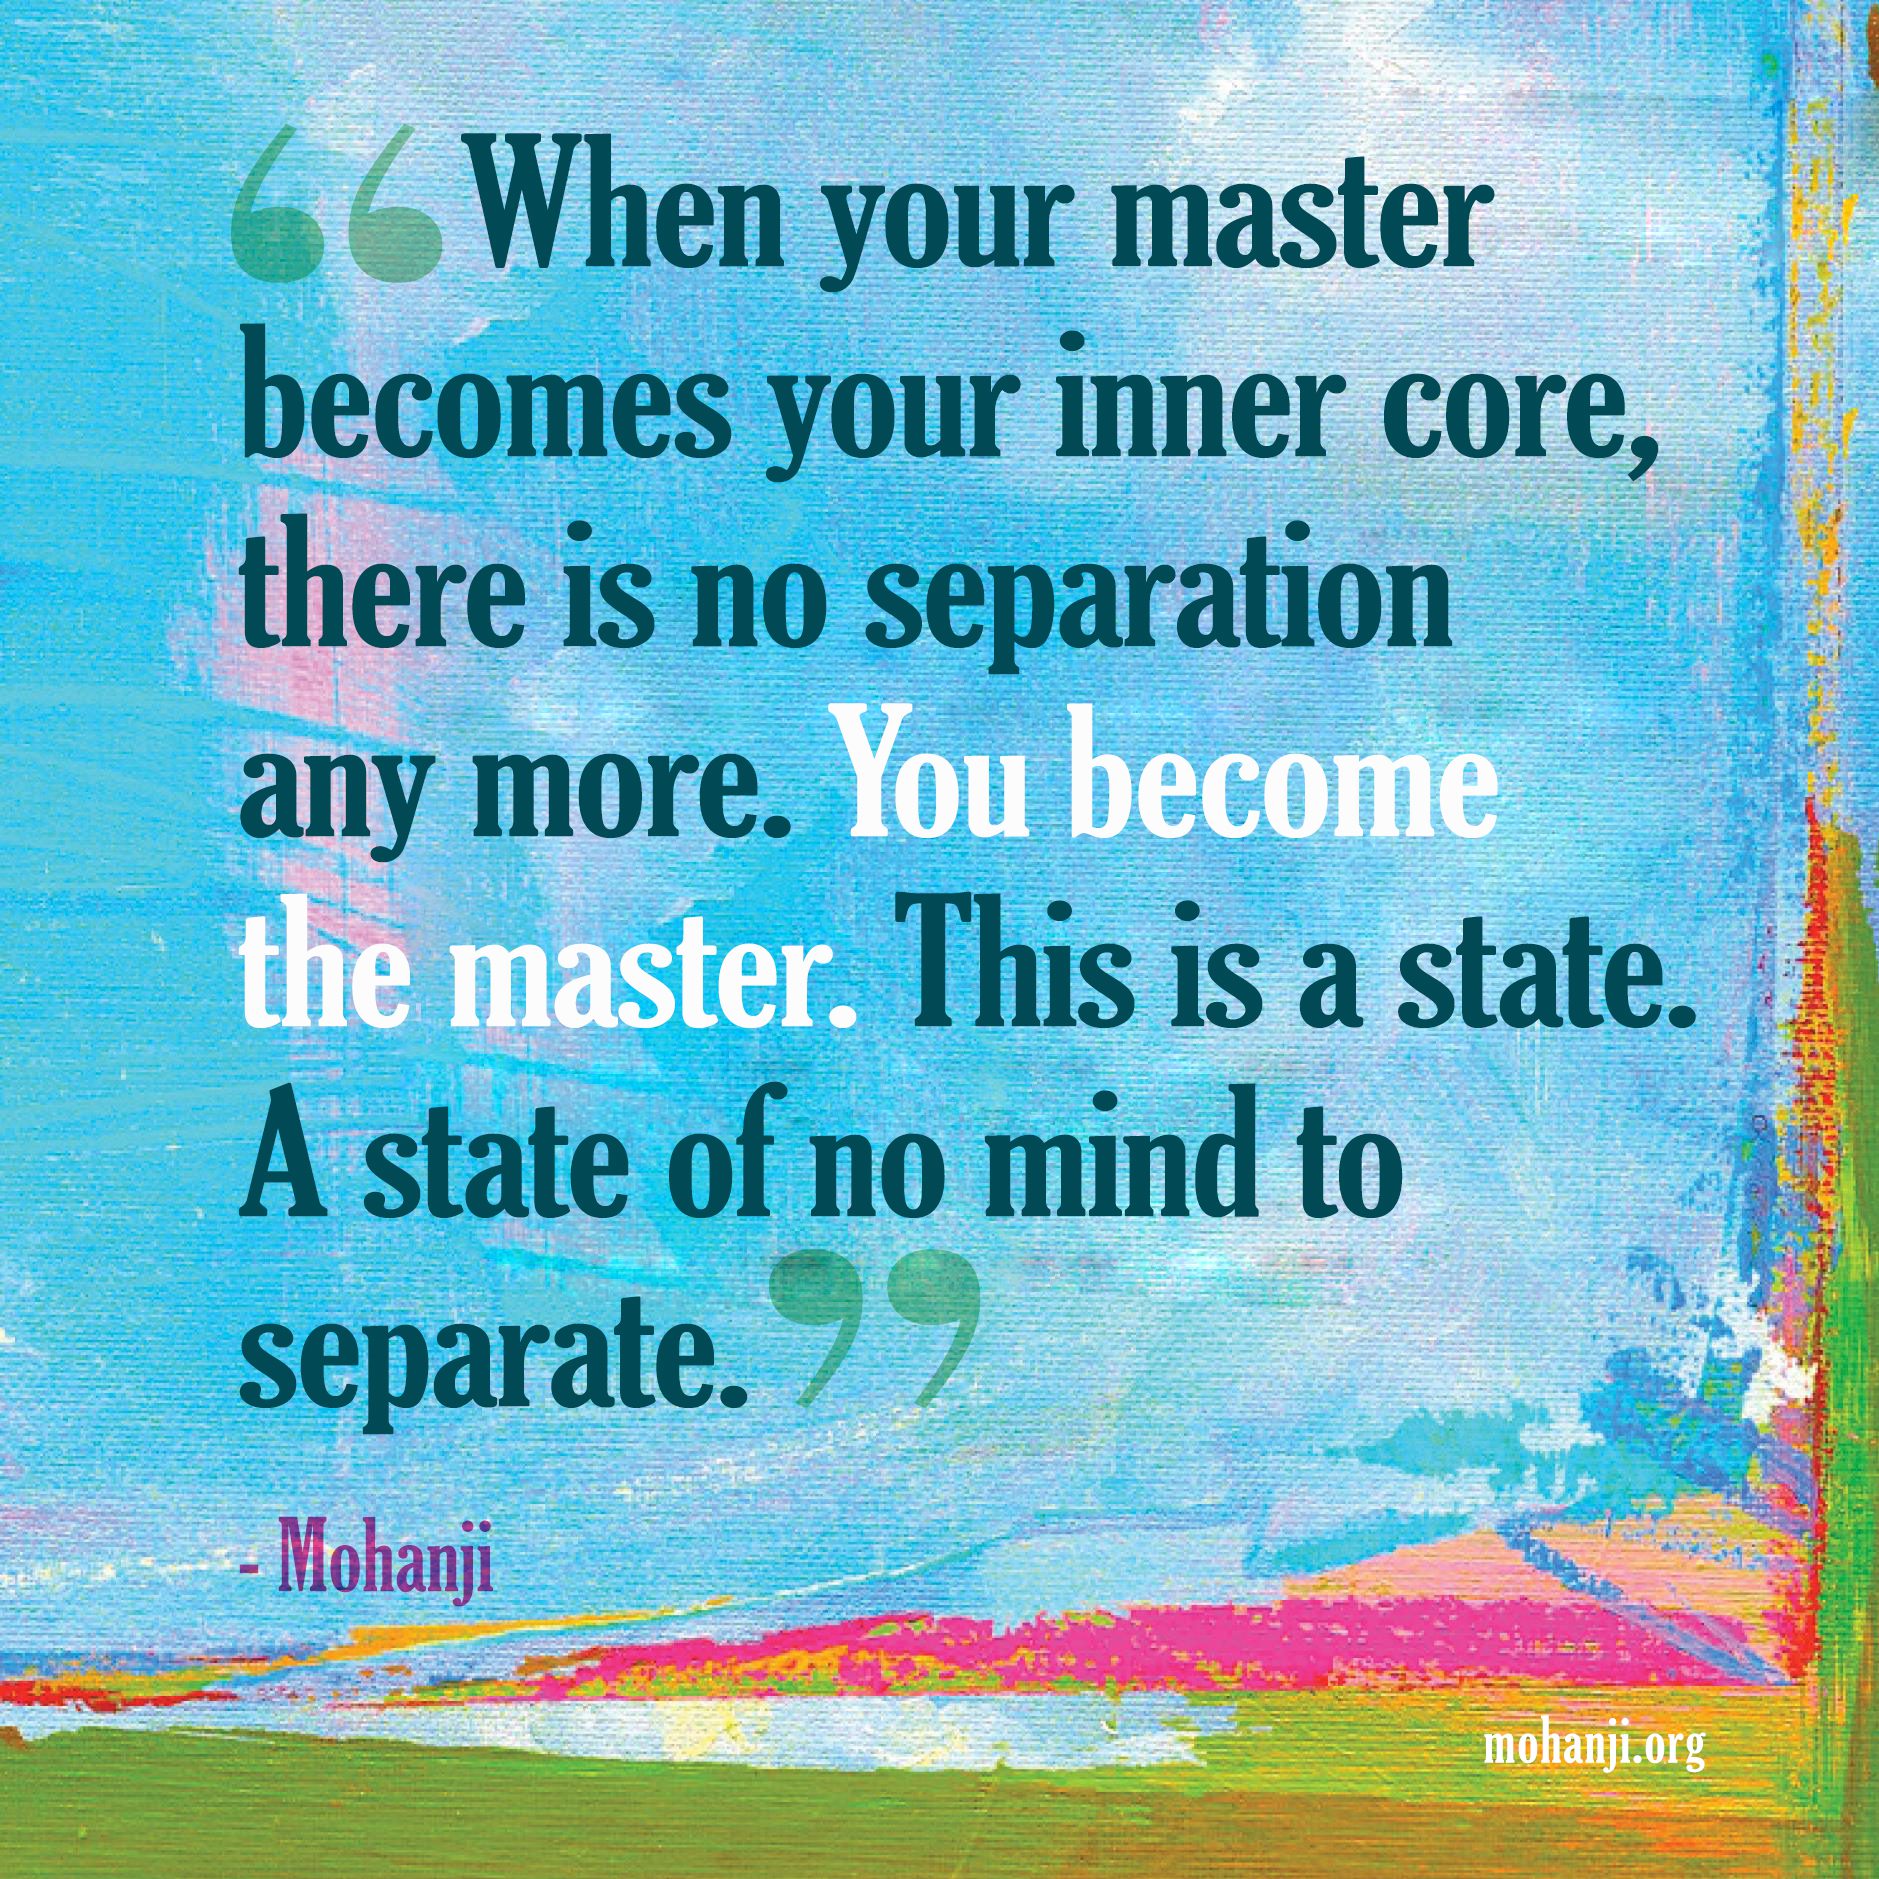 Mohanji quote - Master, become